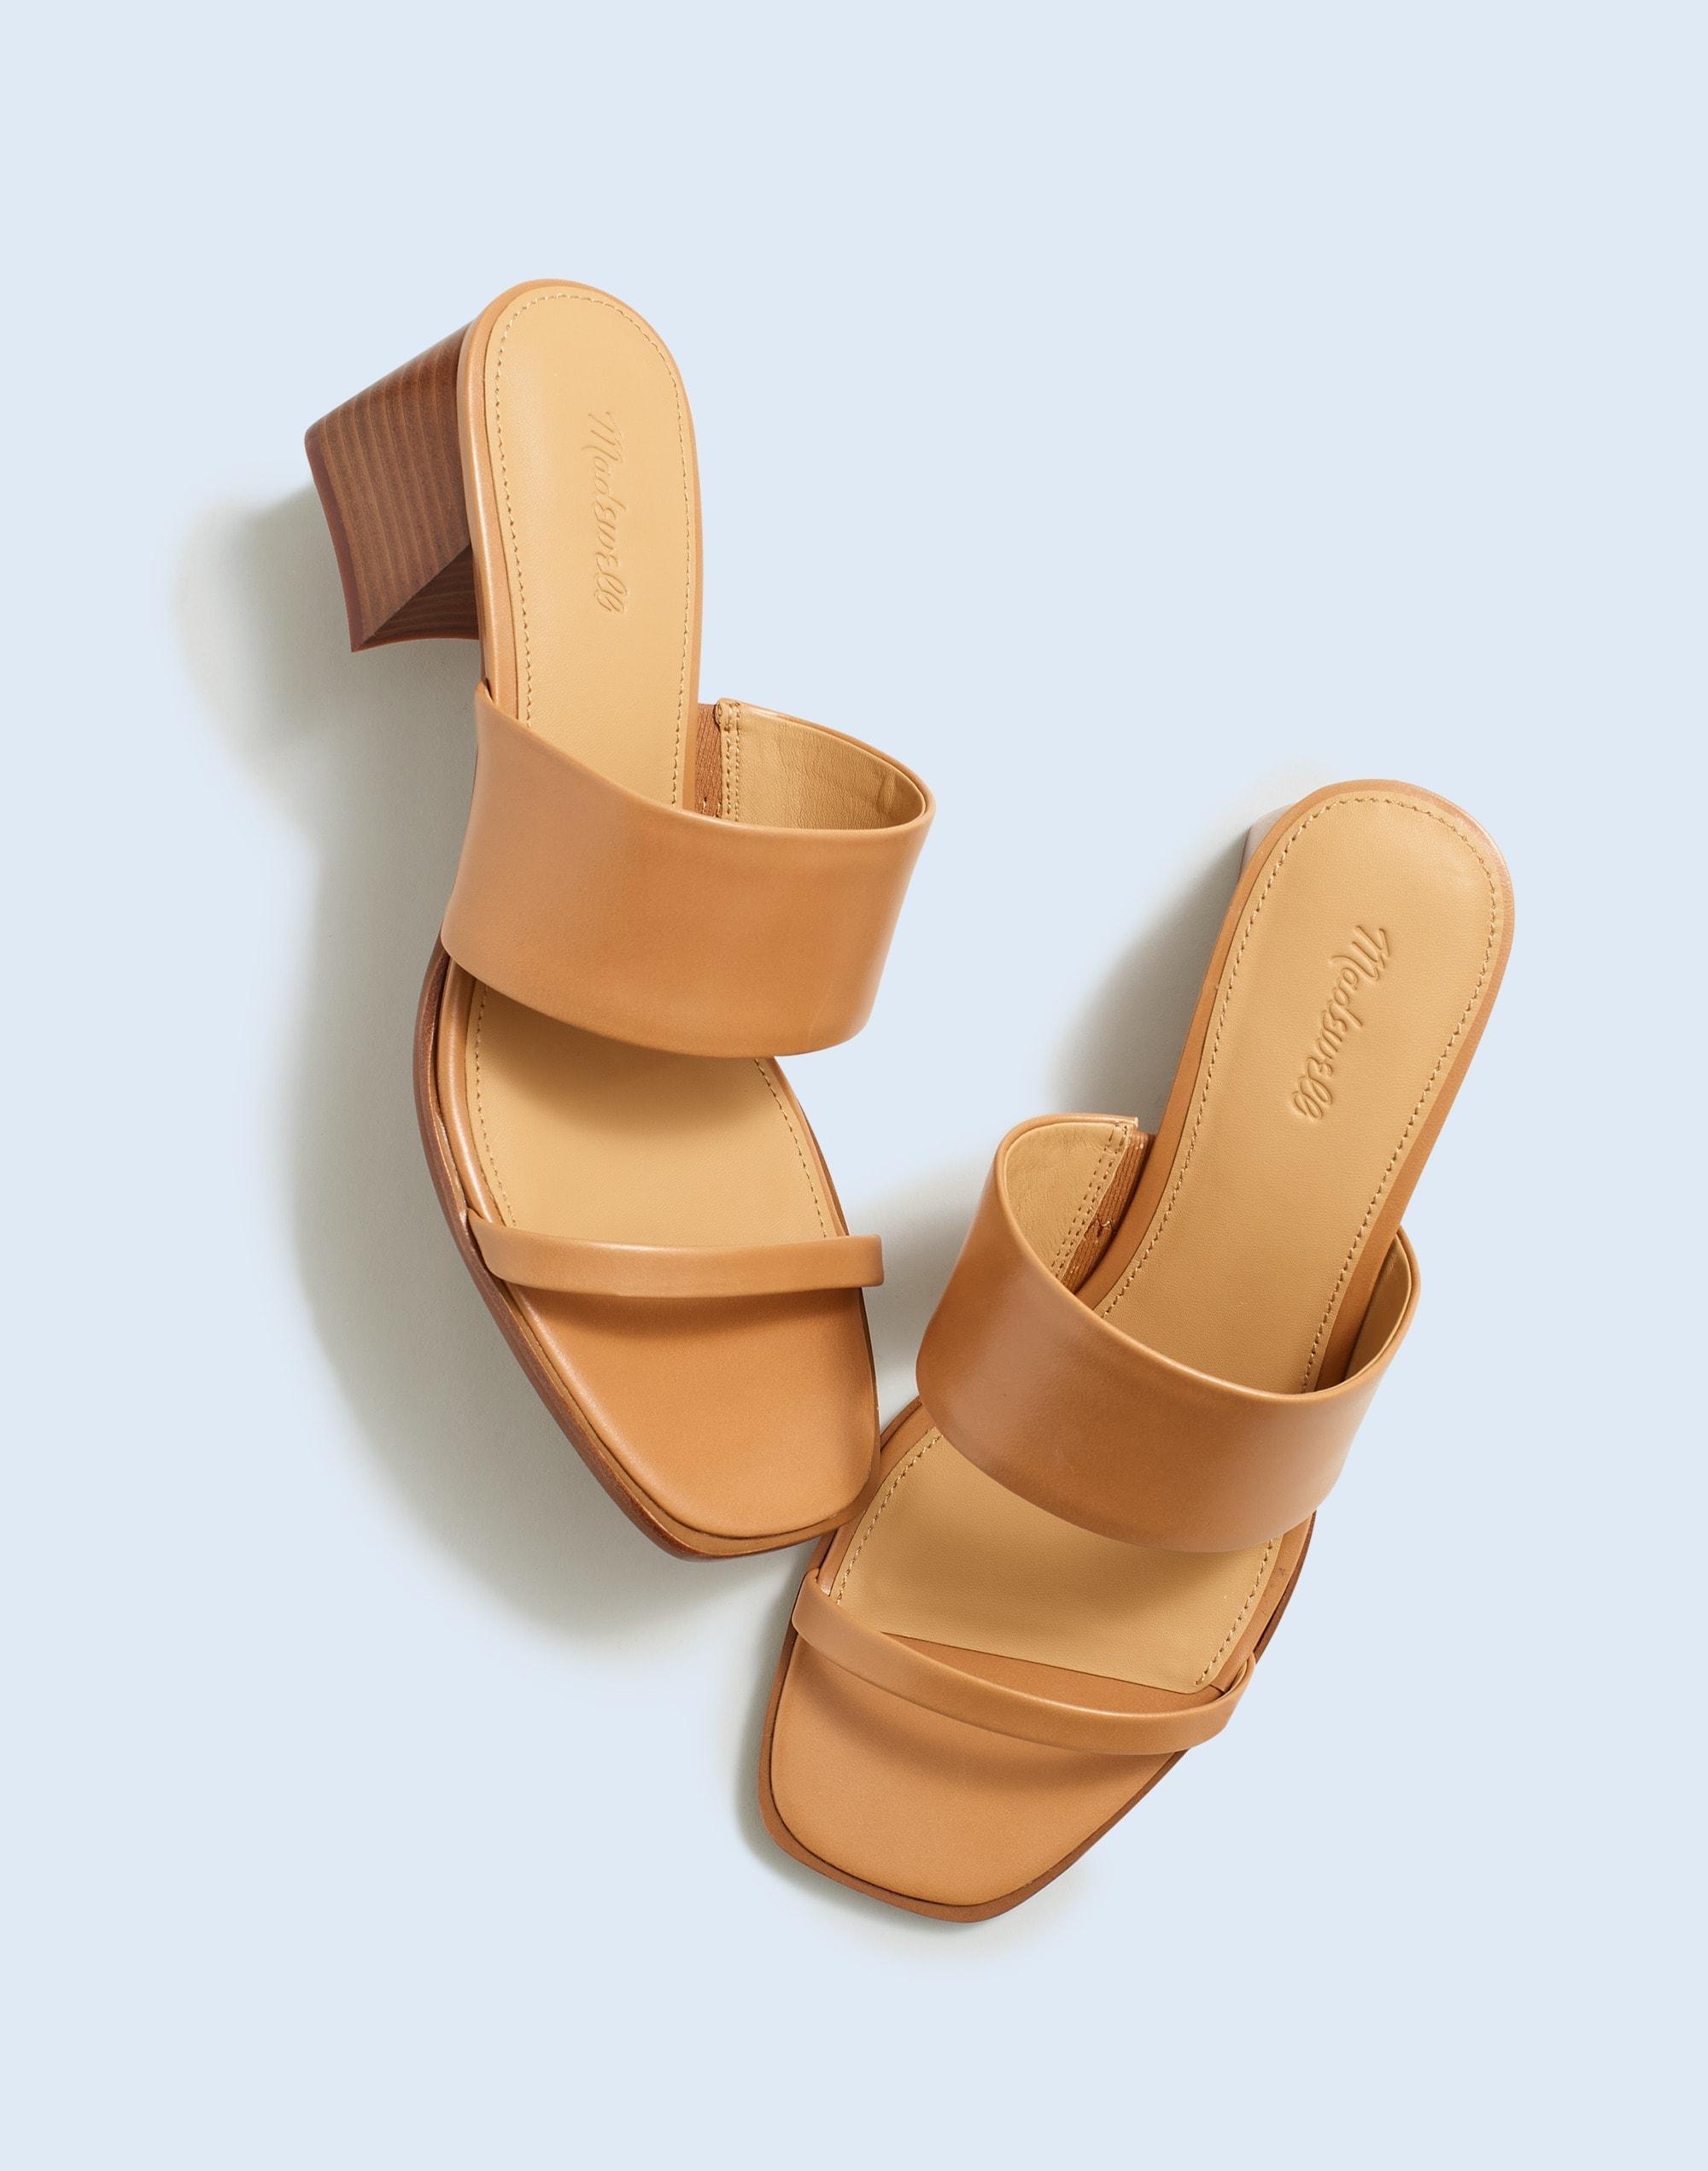 The Kaitlin Sandal in Shiny Leather Product Image